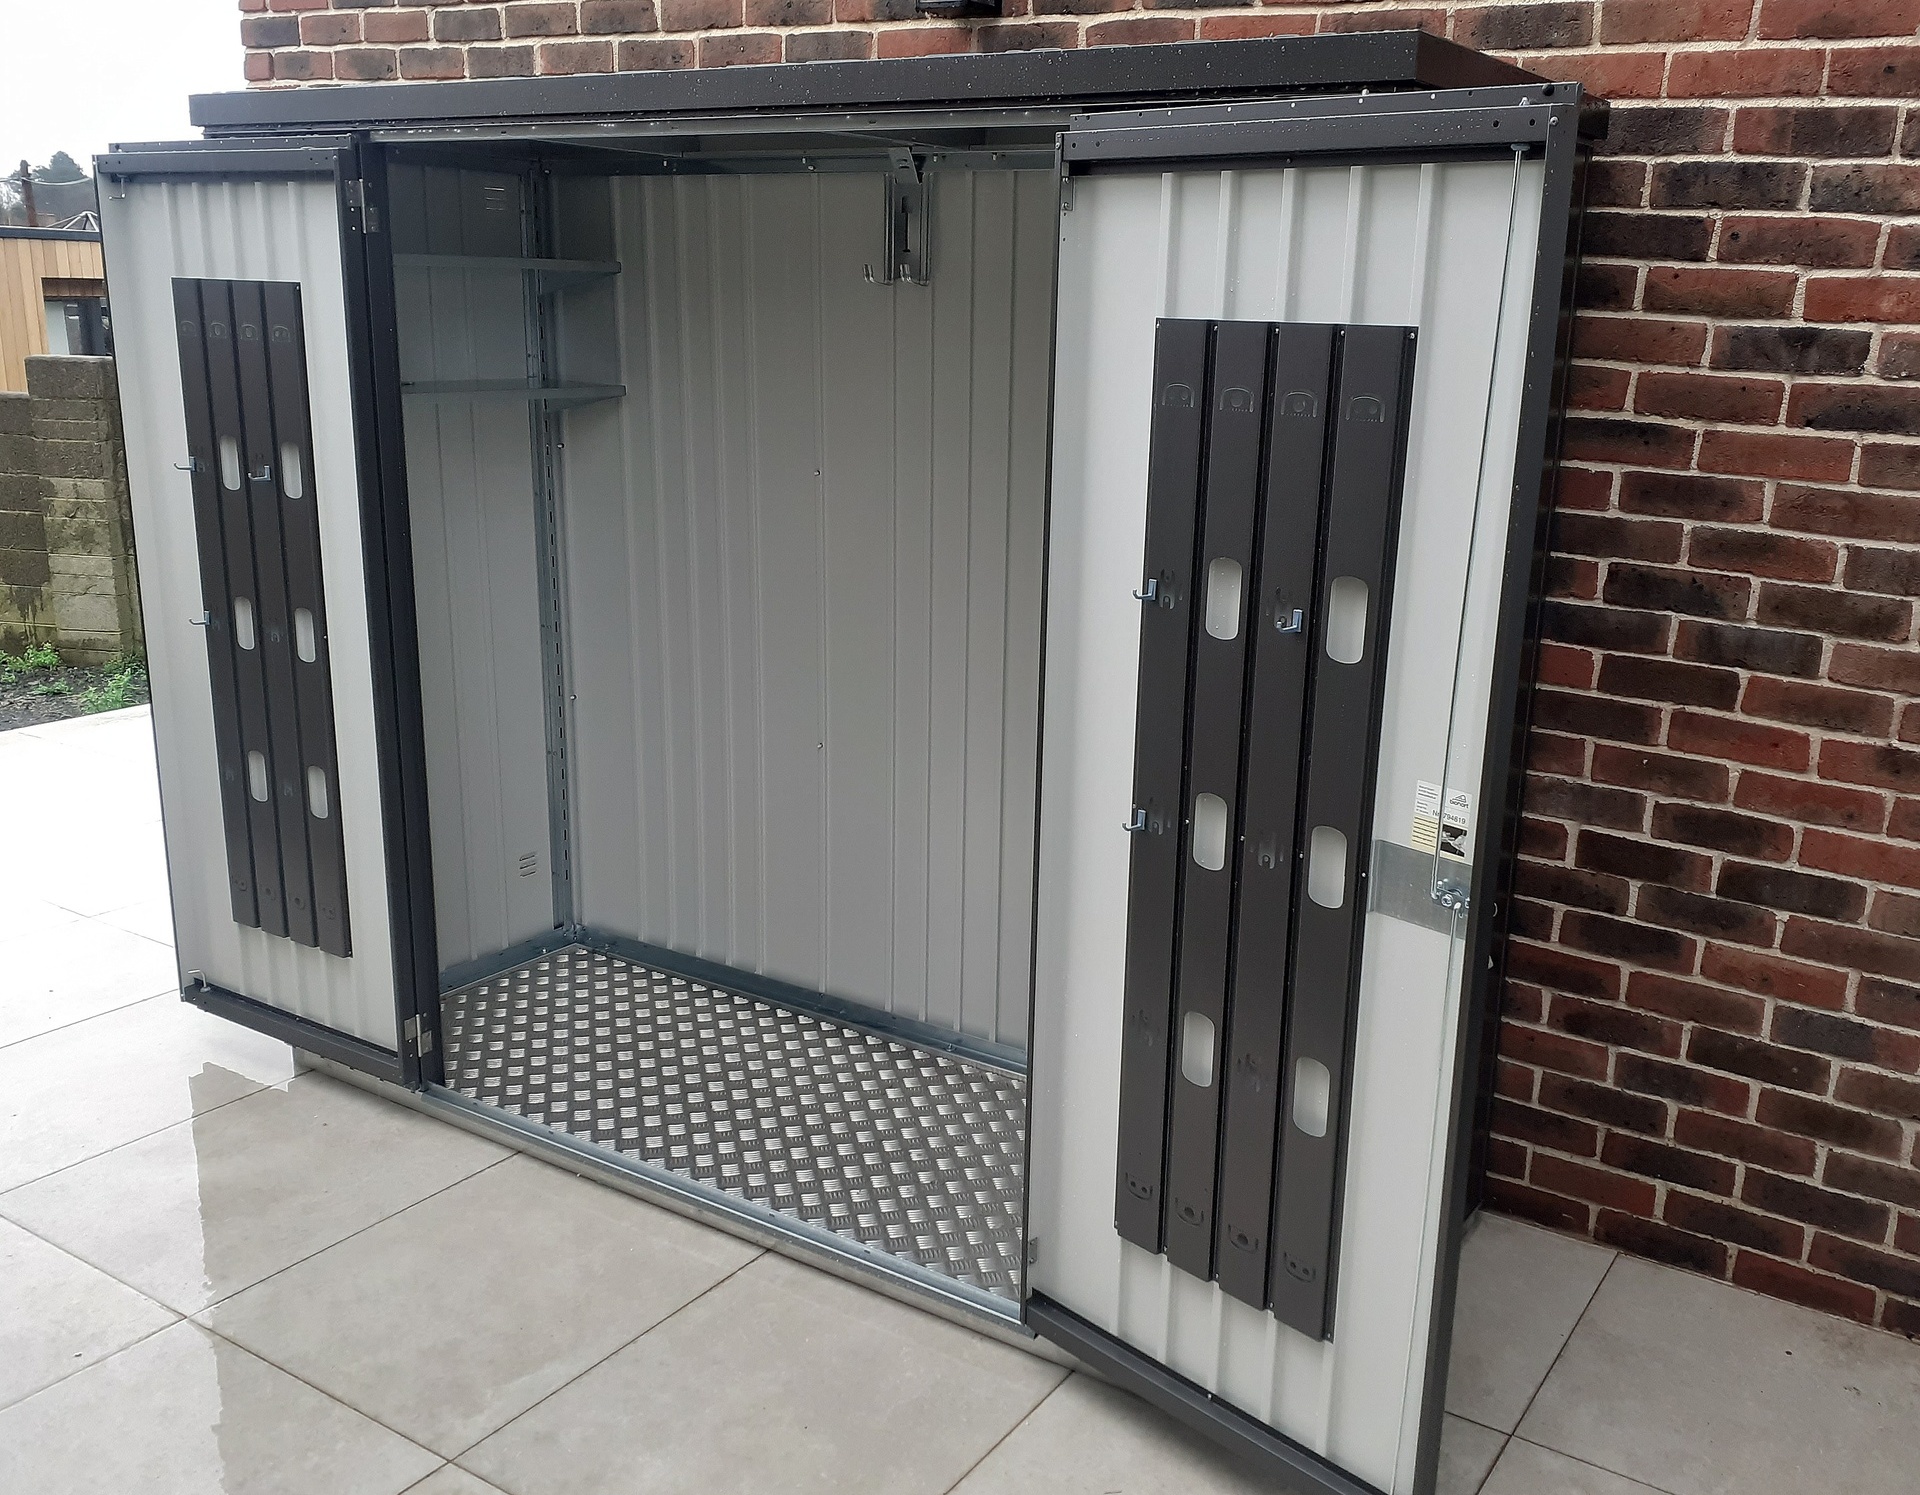 Biohort Equipment Locker 230 | premium quality steel storage shed for patio & garden | Supplied & Fitted by Owen Chubb in Glenageary, Co Dublin | BEST PRICES in Ireland | Tel 087-2306 128